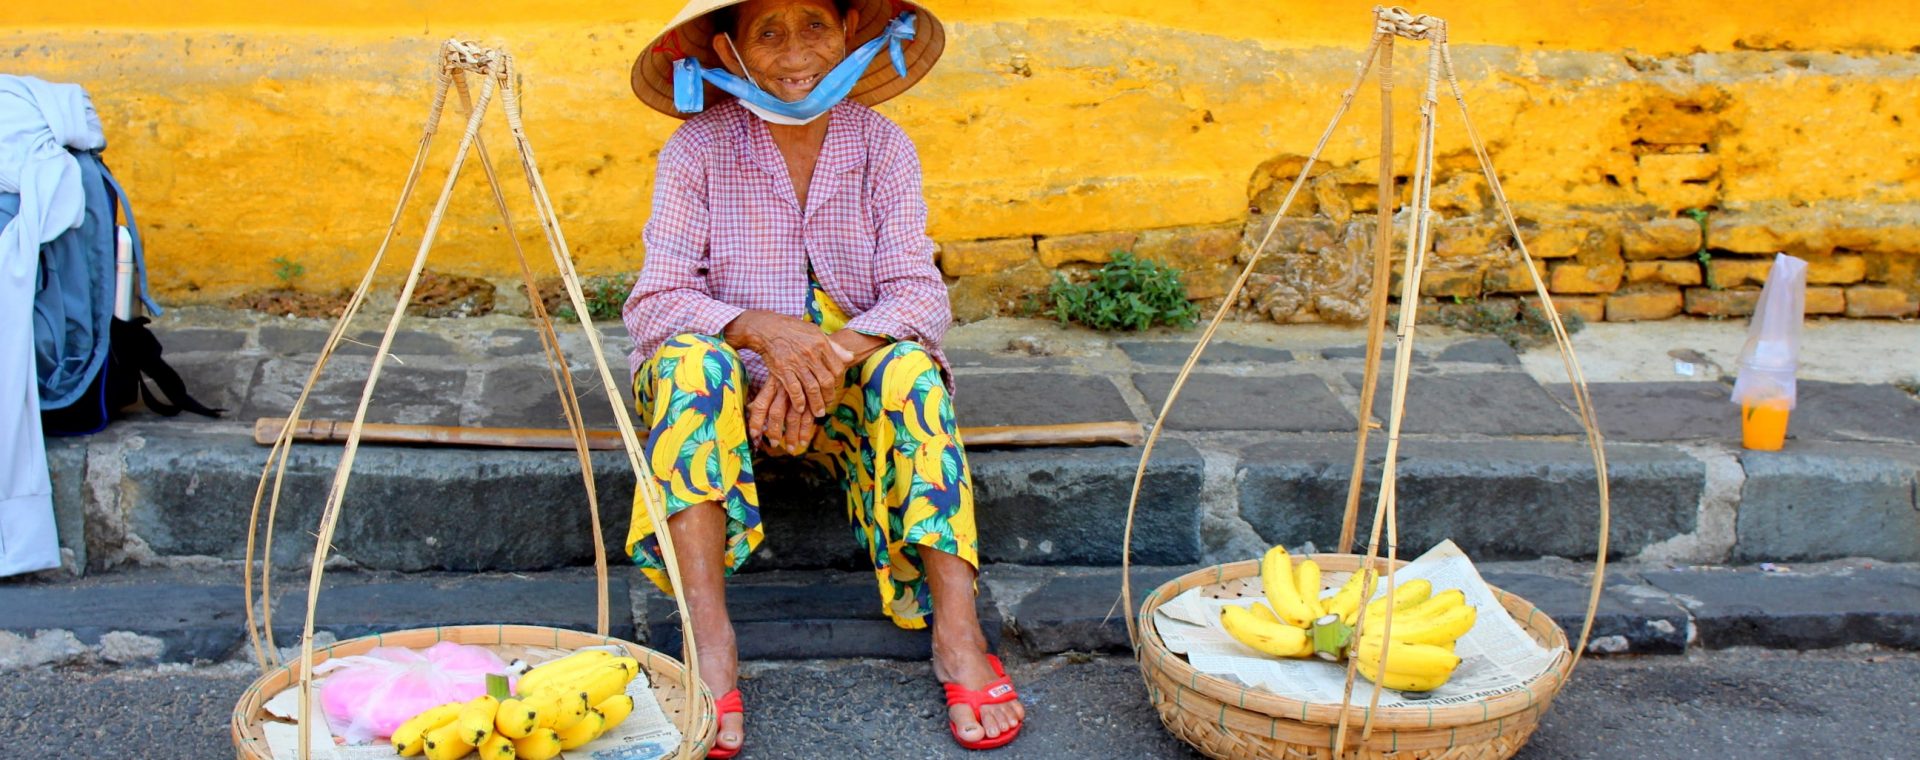 48 hours in hoi an